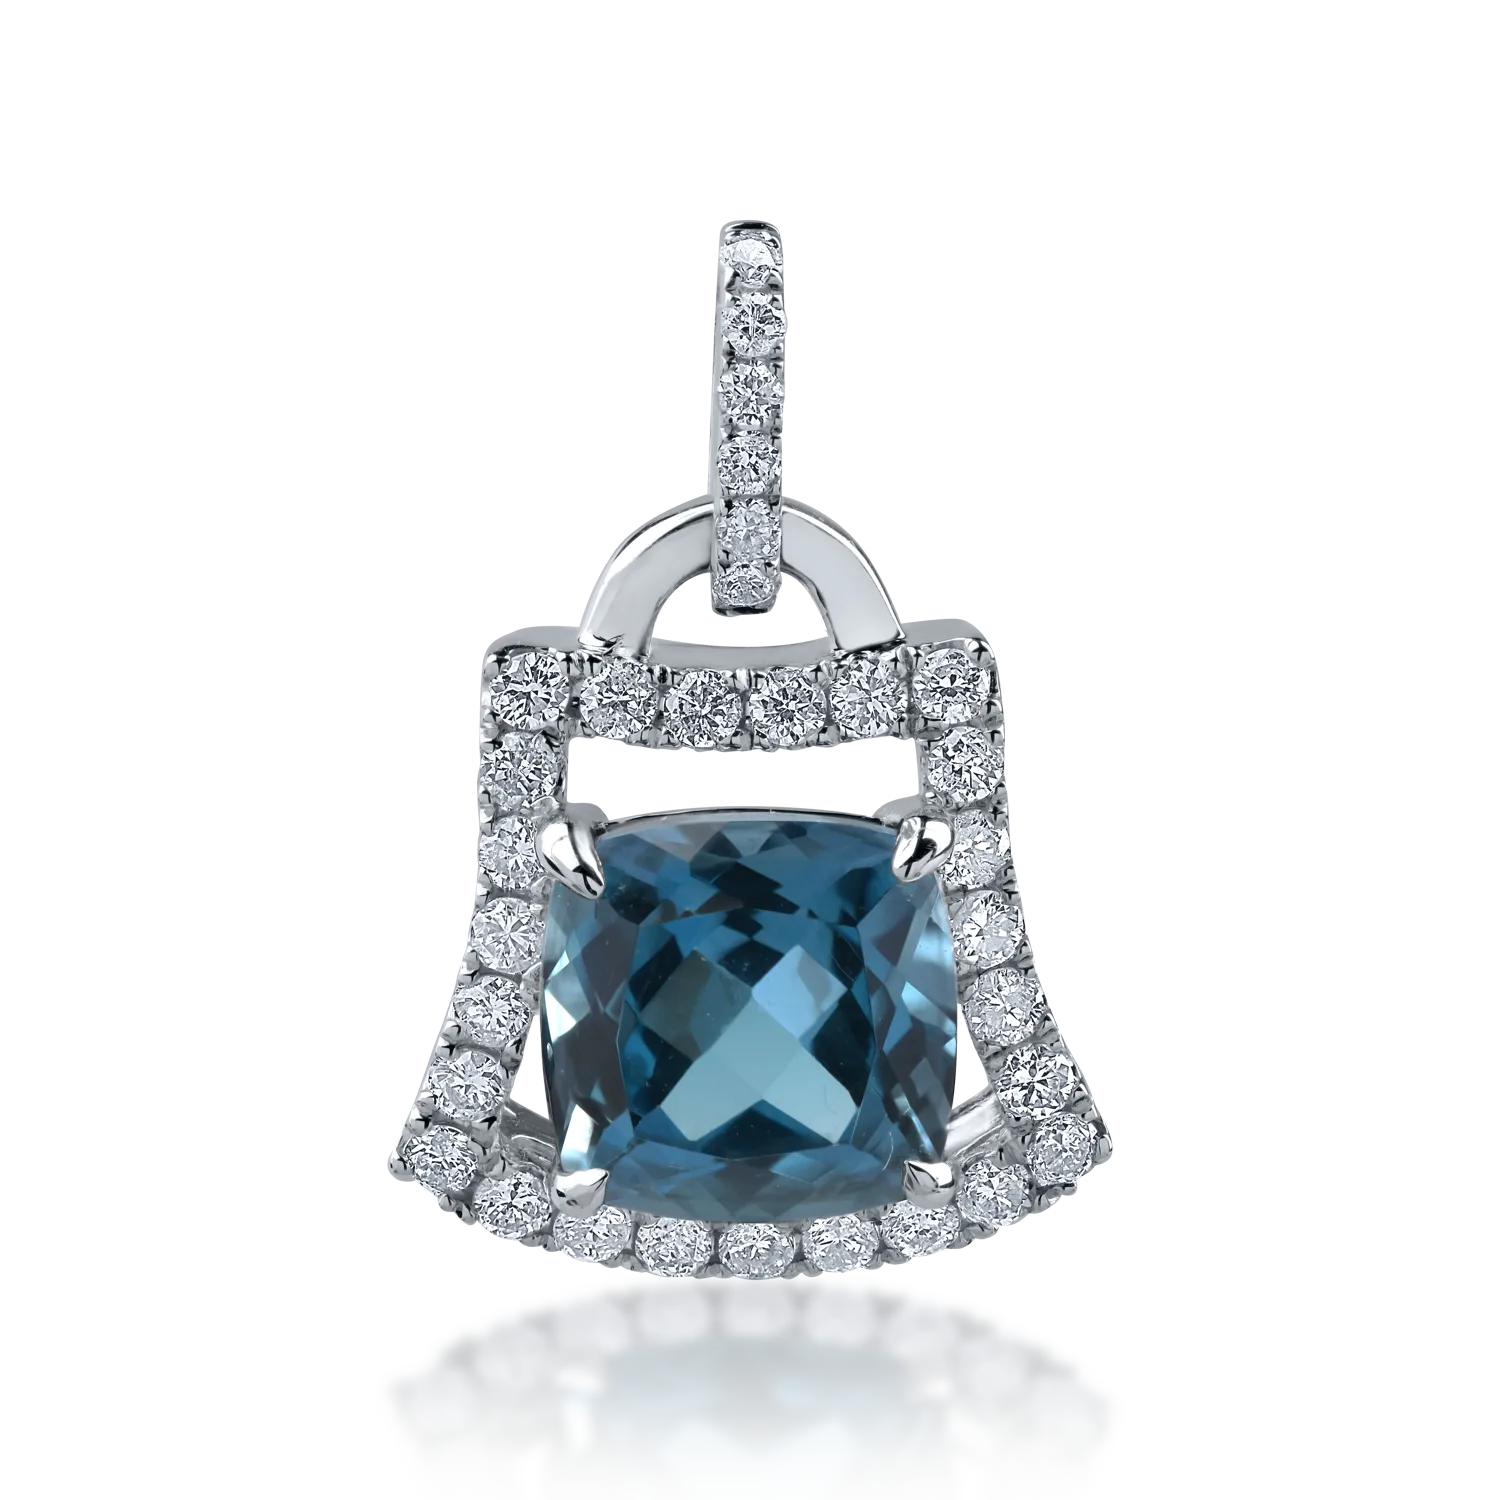 White gold pendant with 1.974ct london blue topaz and 0.269ct diamonds